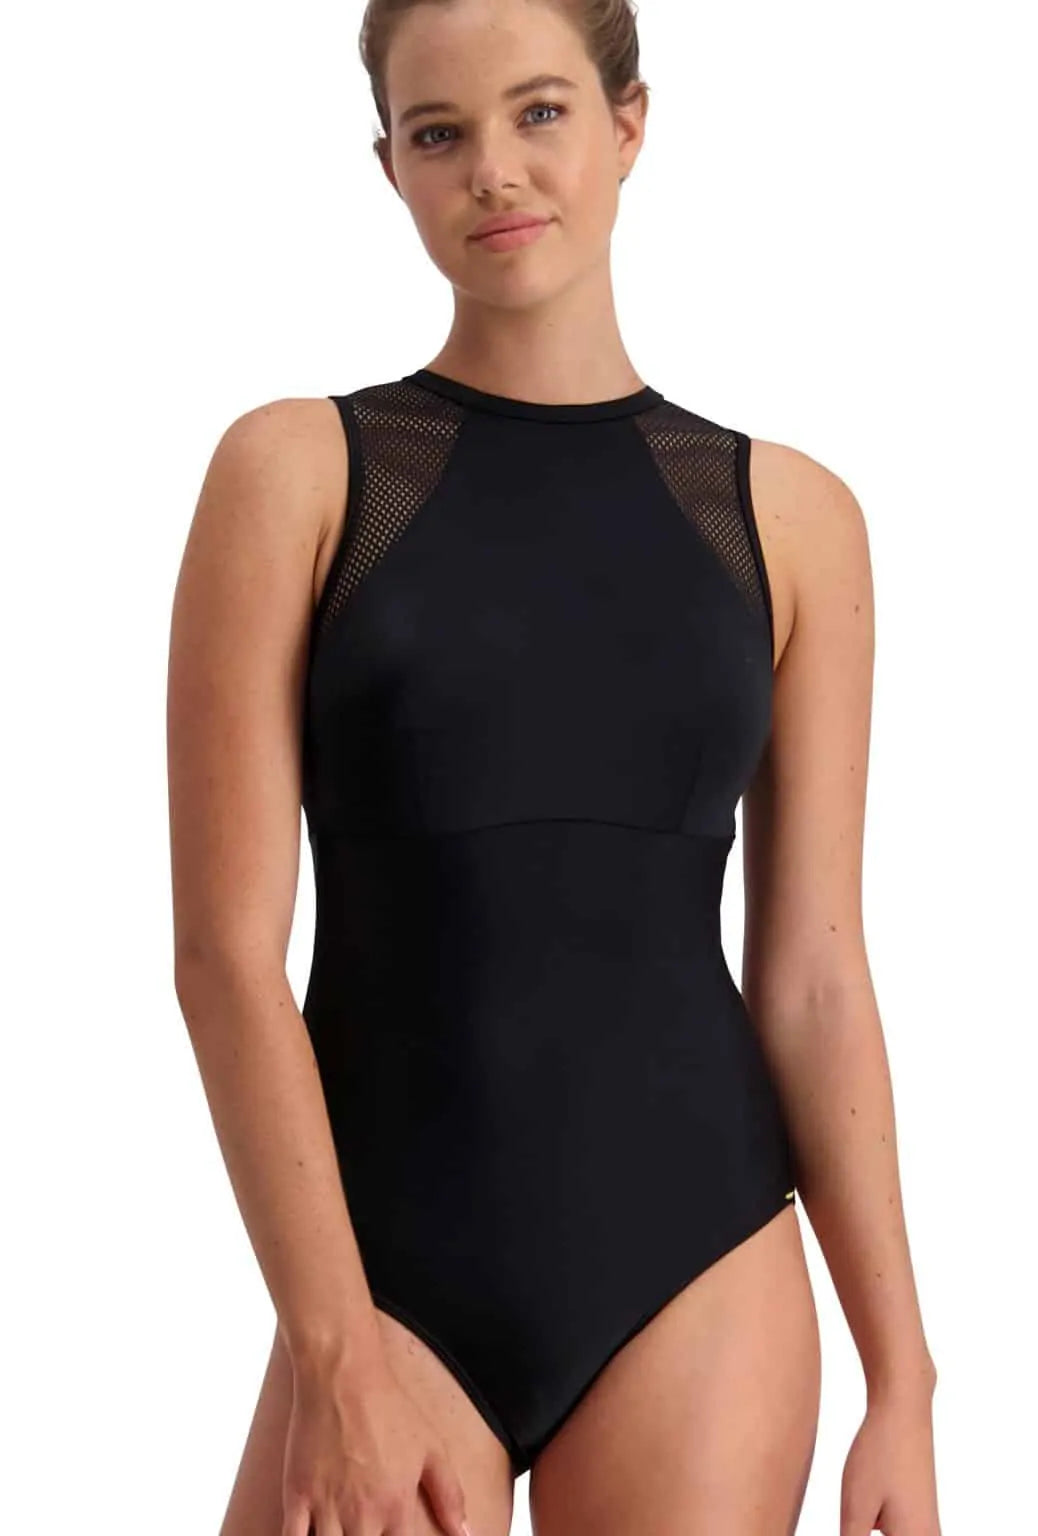 Piha Solid Separates Mesh High Neck One Piece Swimsuit